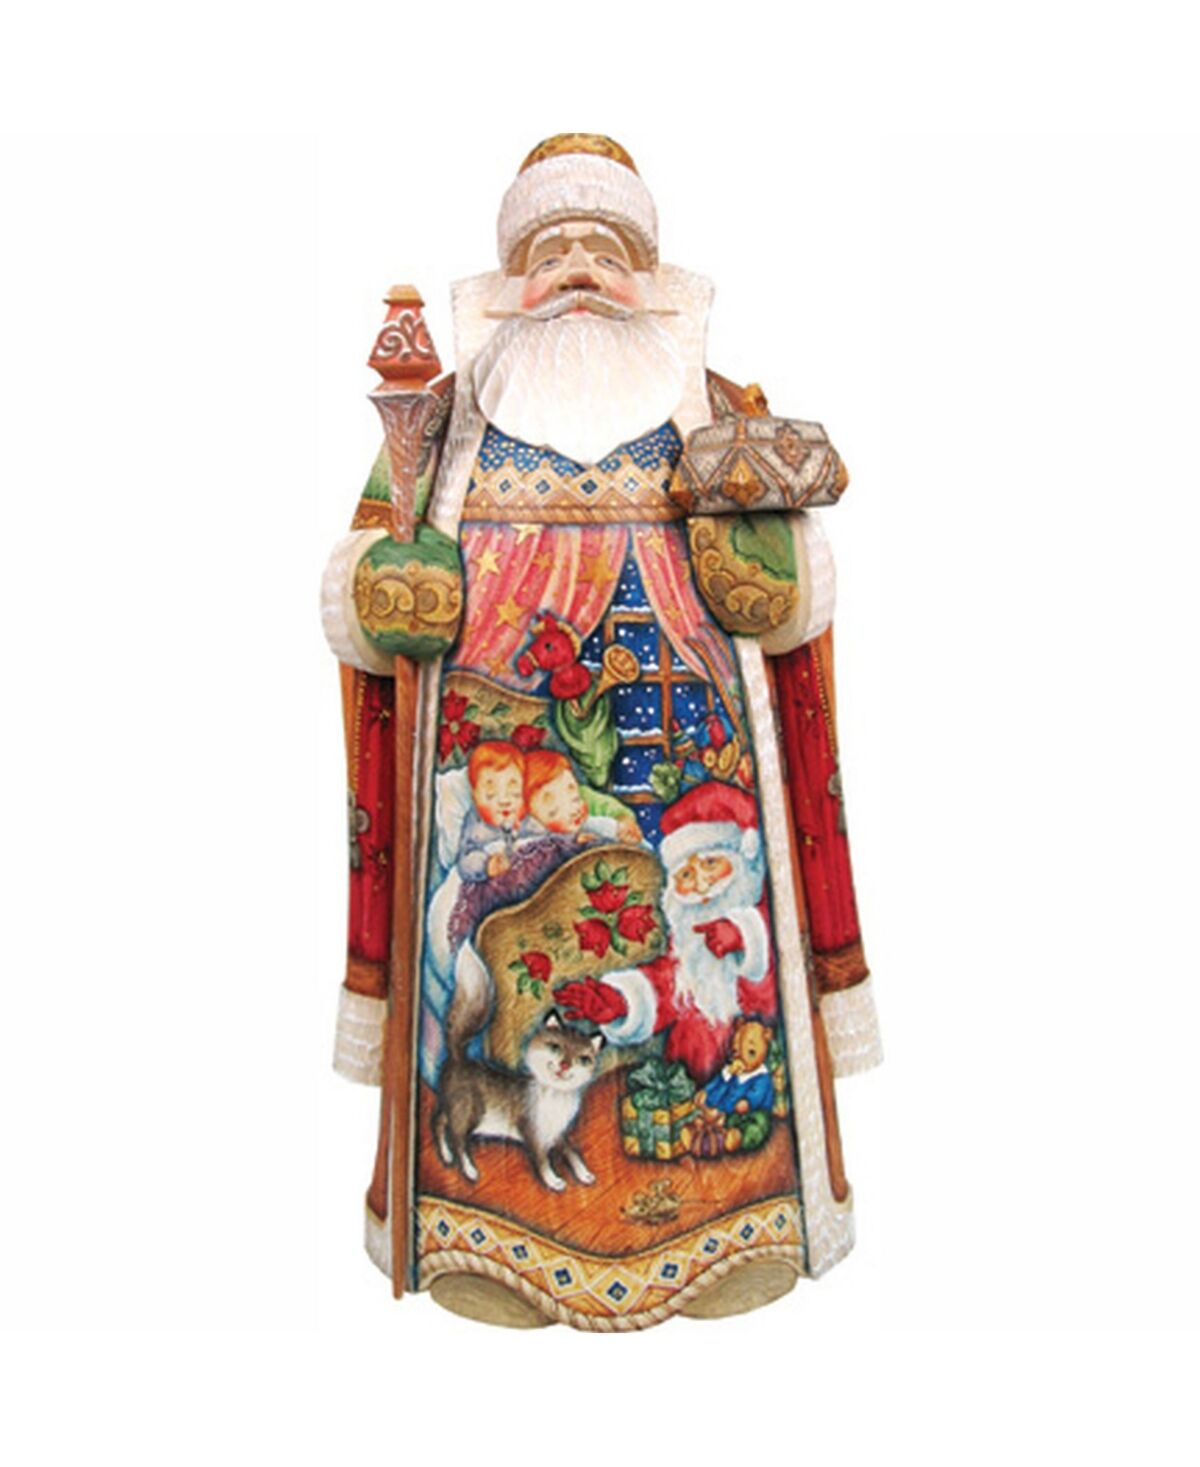 G.DeBrekht Woodcarved and Hand Painted All Through The House Santa Claus Figurine - Multi